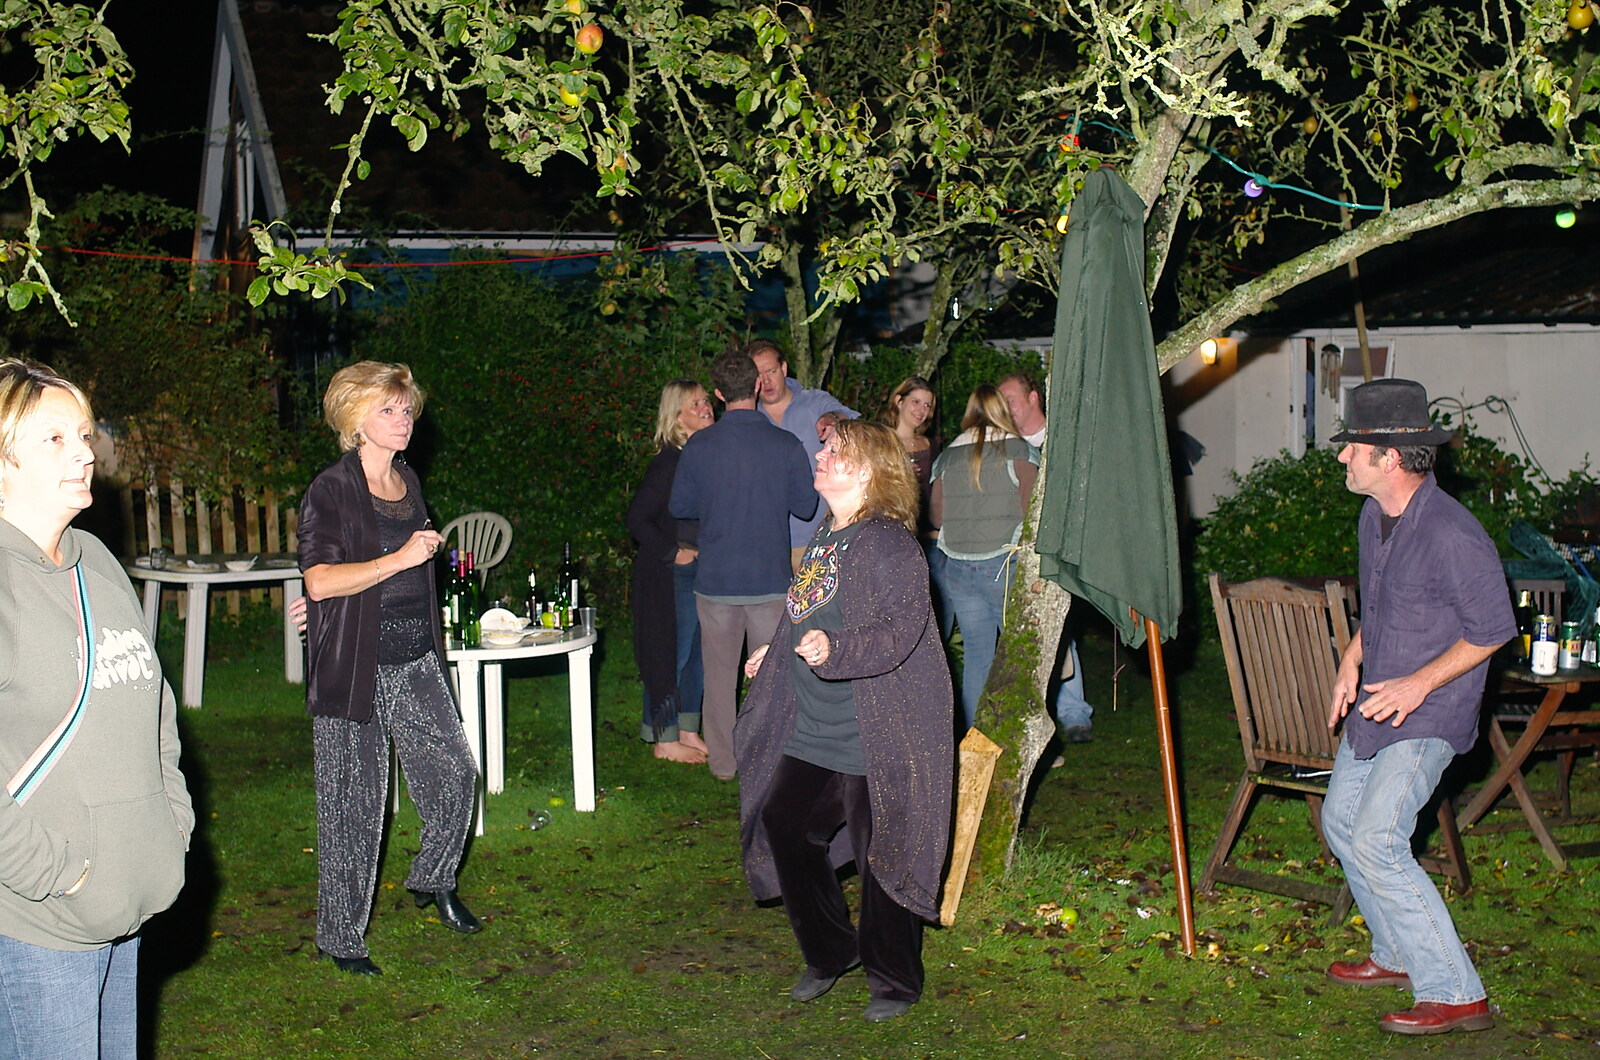 Dancing under a tree from Jo and Steph's Party, Burston, Norfolk - 30th September 2005